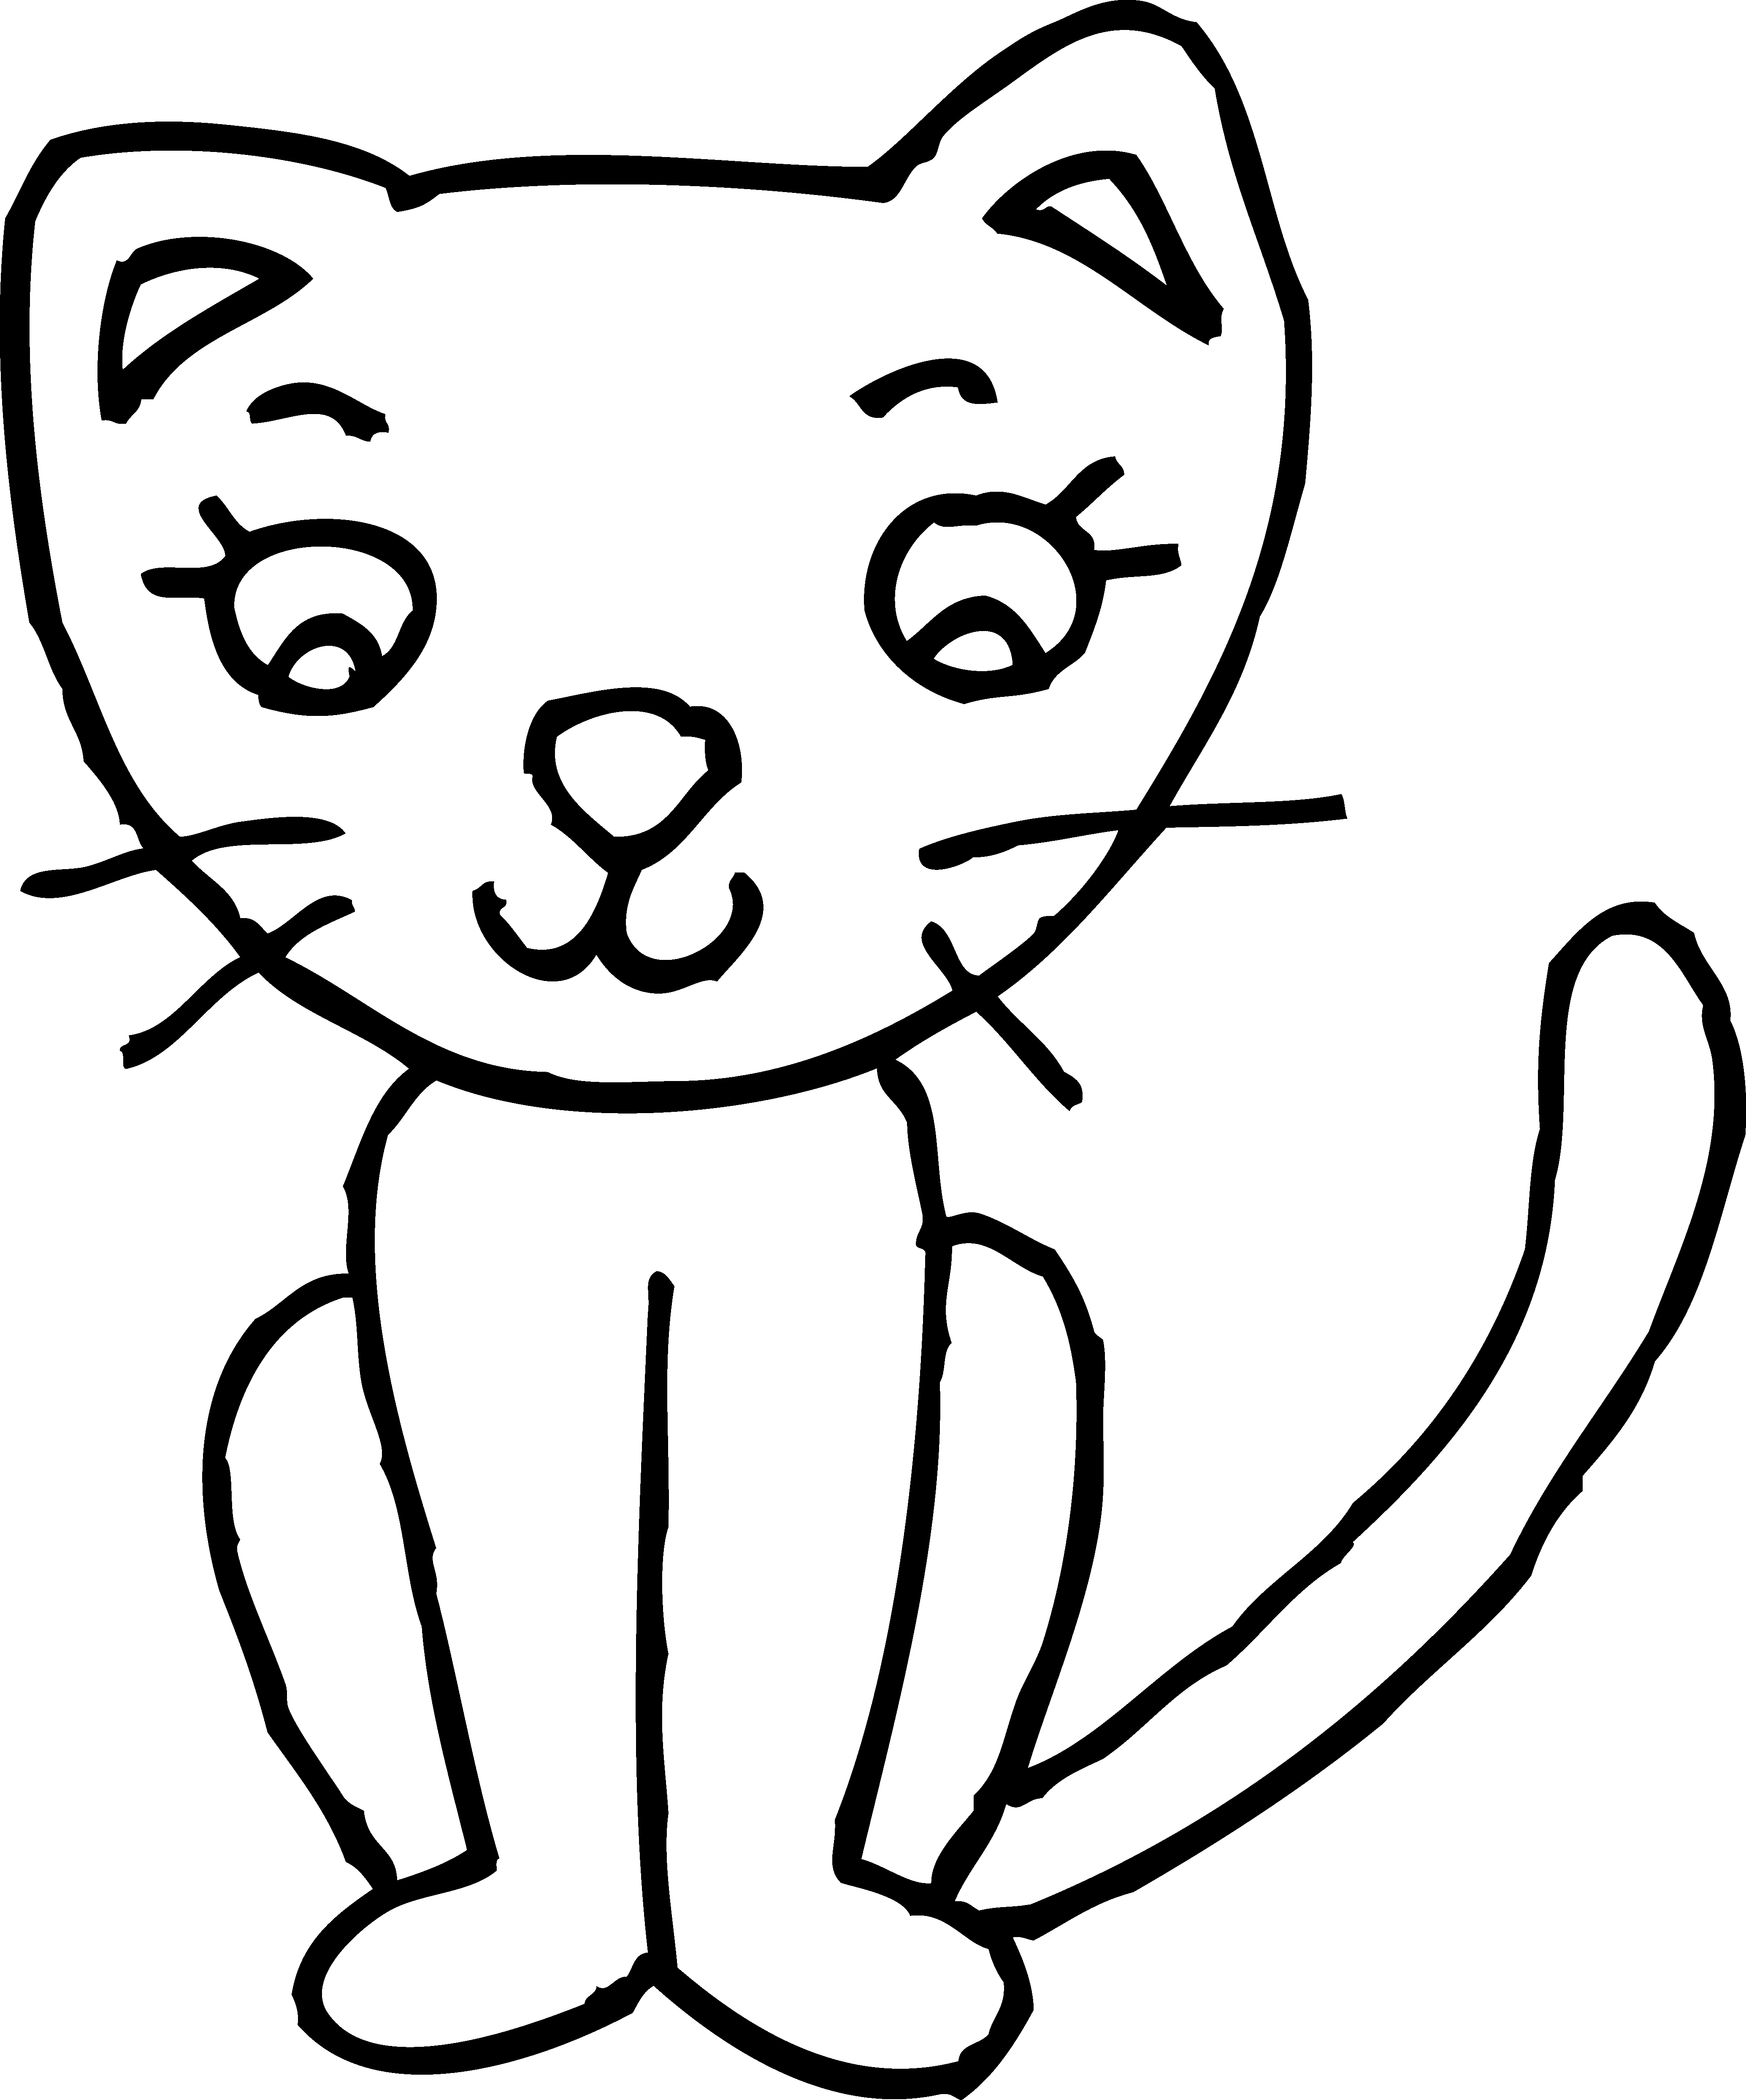 Cute Kitty Colorable Line Art - Free Clip Art